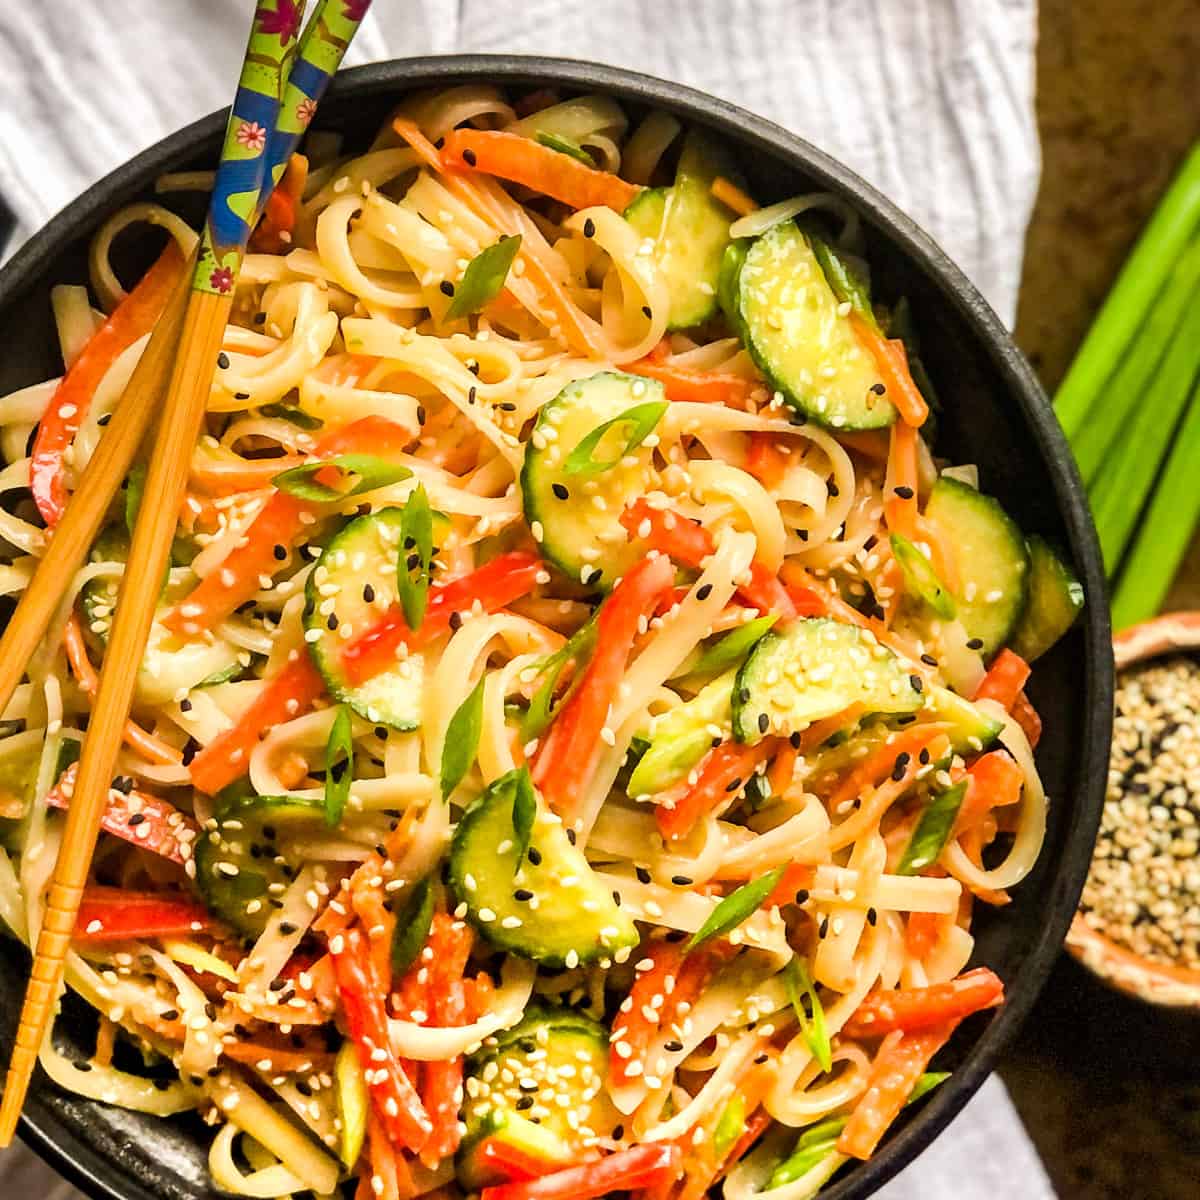 Rice noodle salad in a black bowl with chopsticks resting on top.